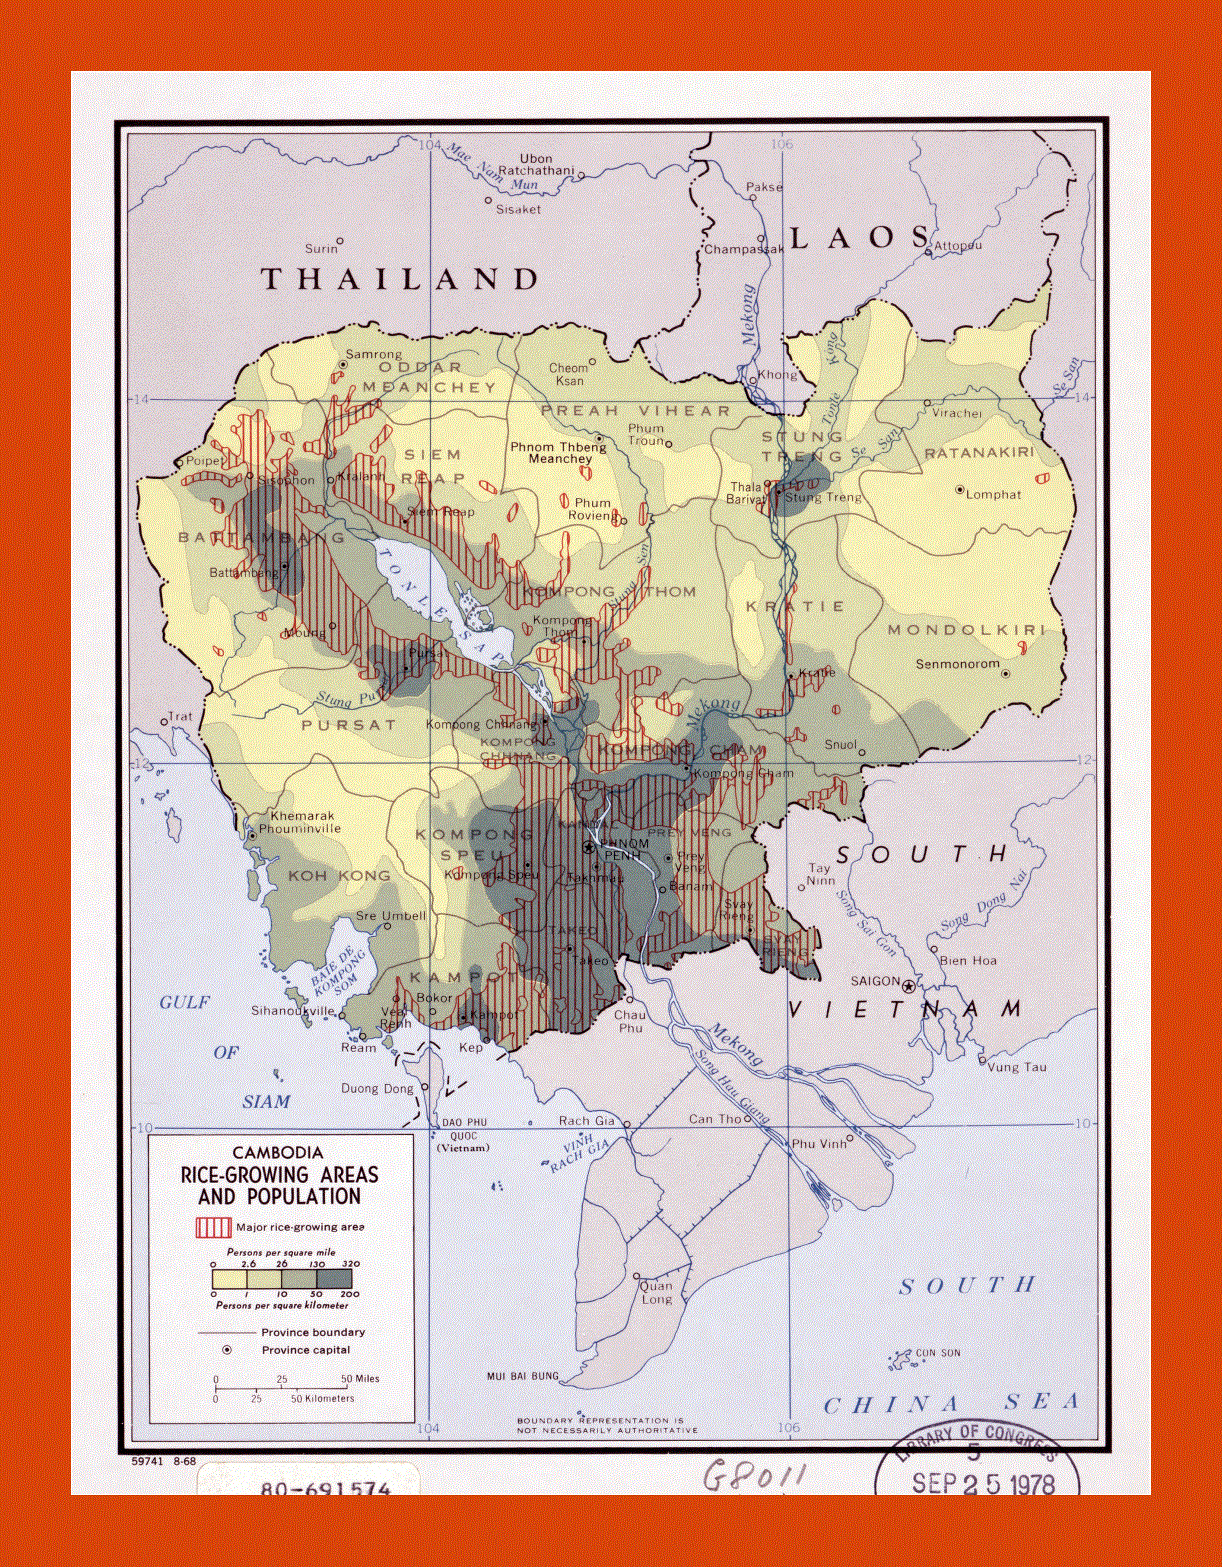 Rice growing areas and population map of Cambodia - 1968